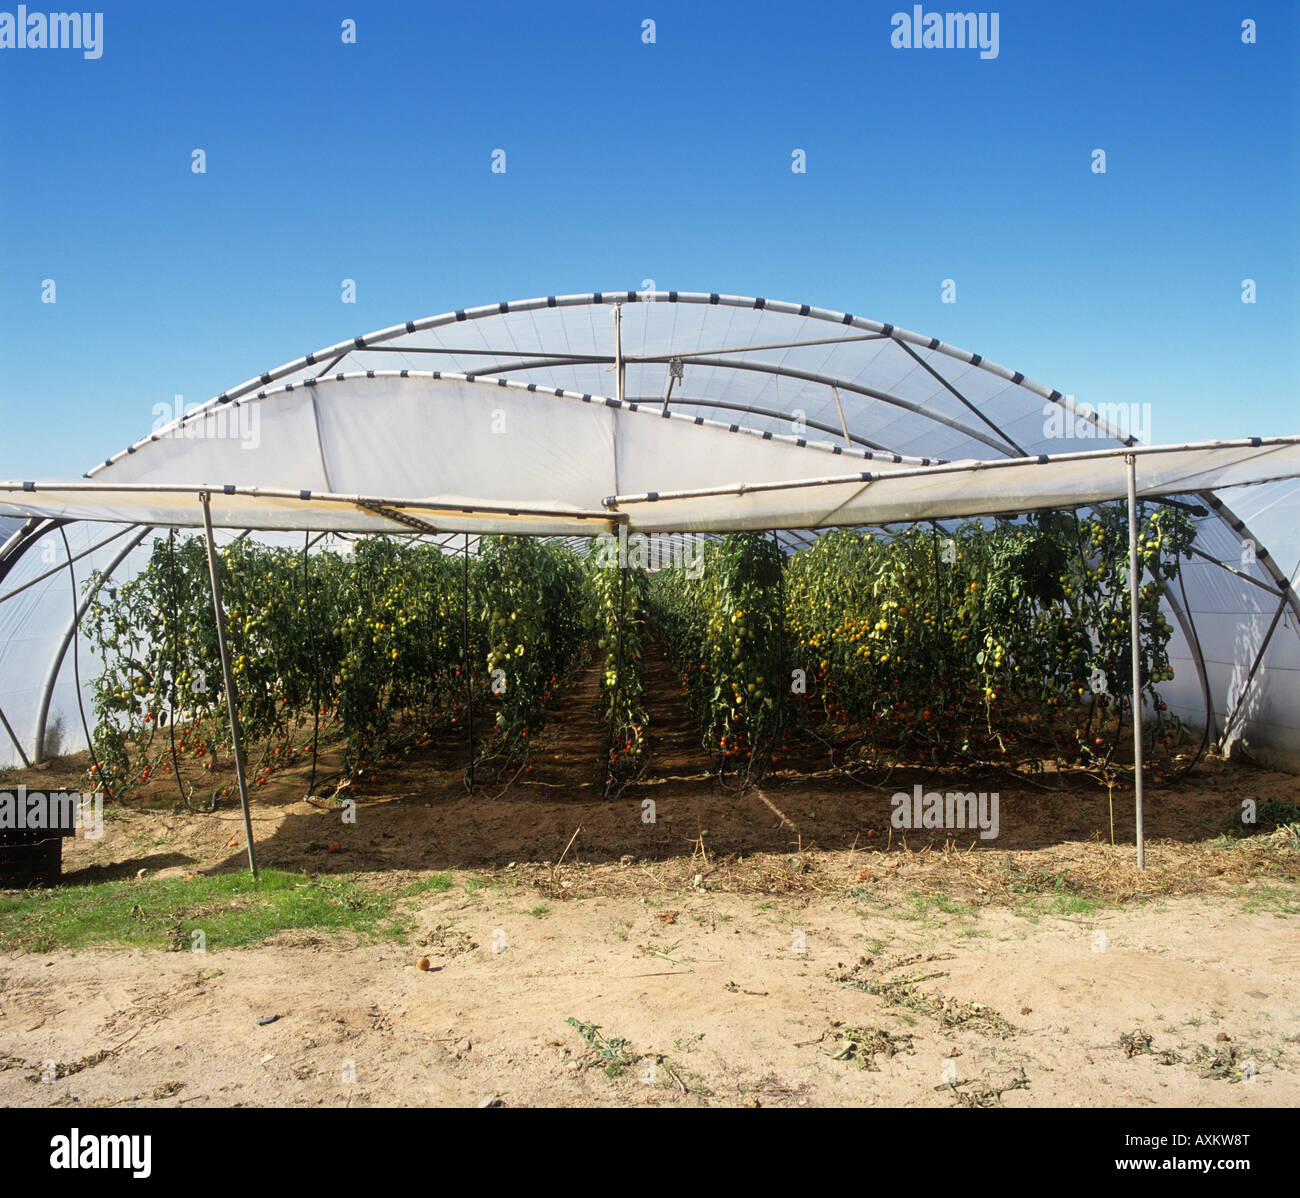 Polythene house with front raised to show mature tomato crop grown inside Portugal Stock Photo